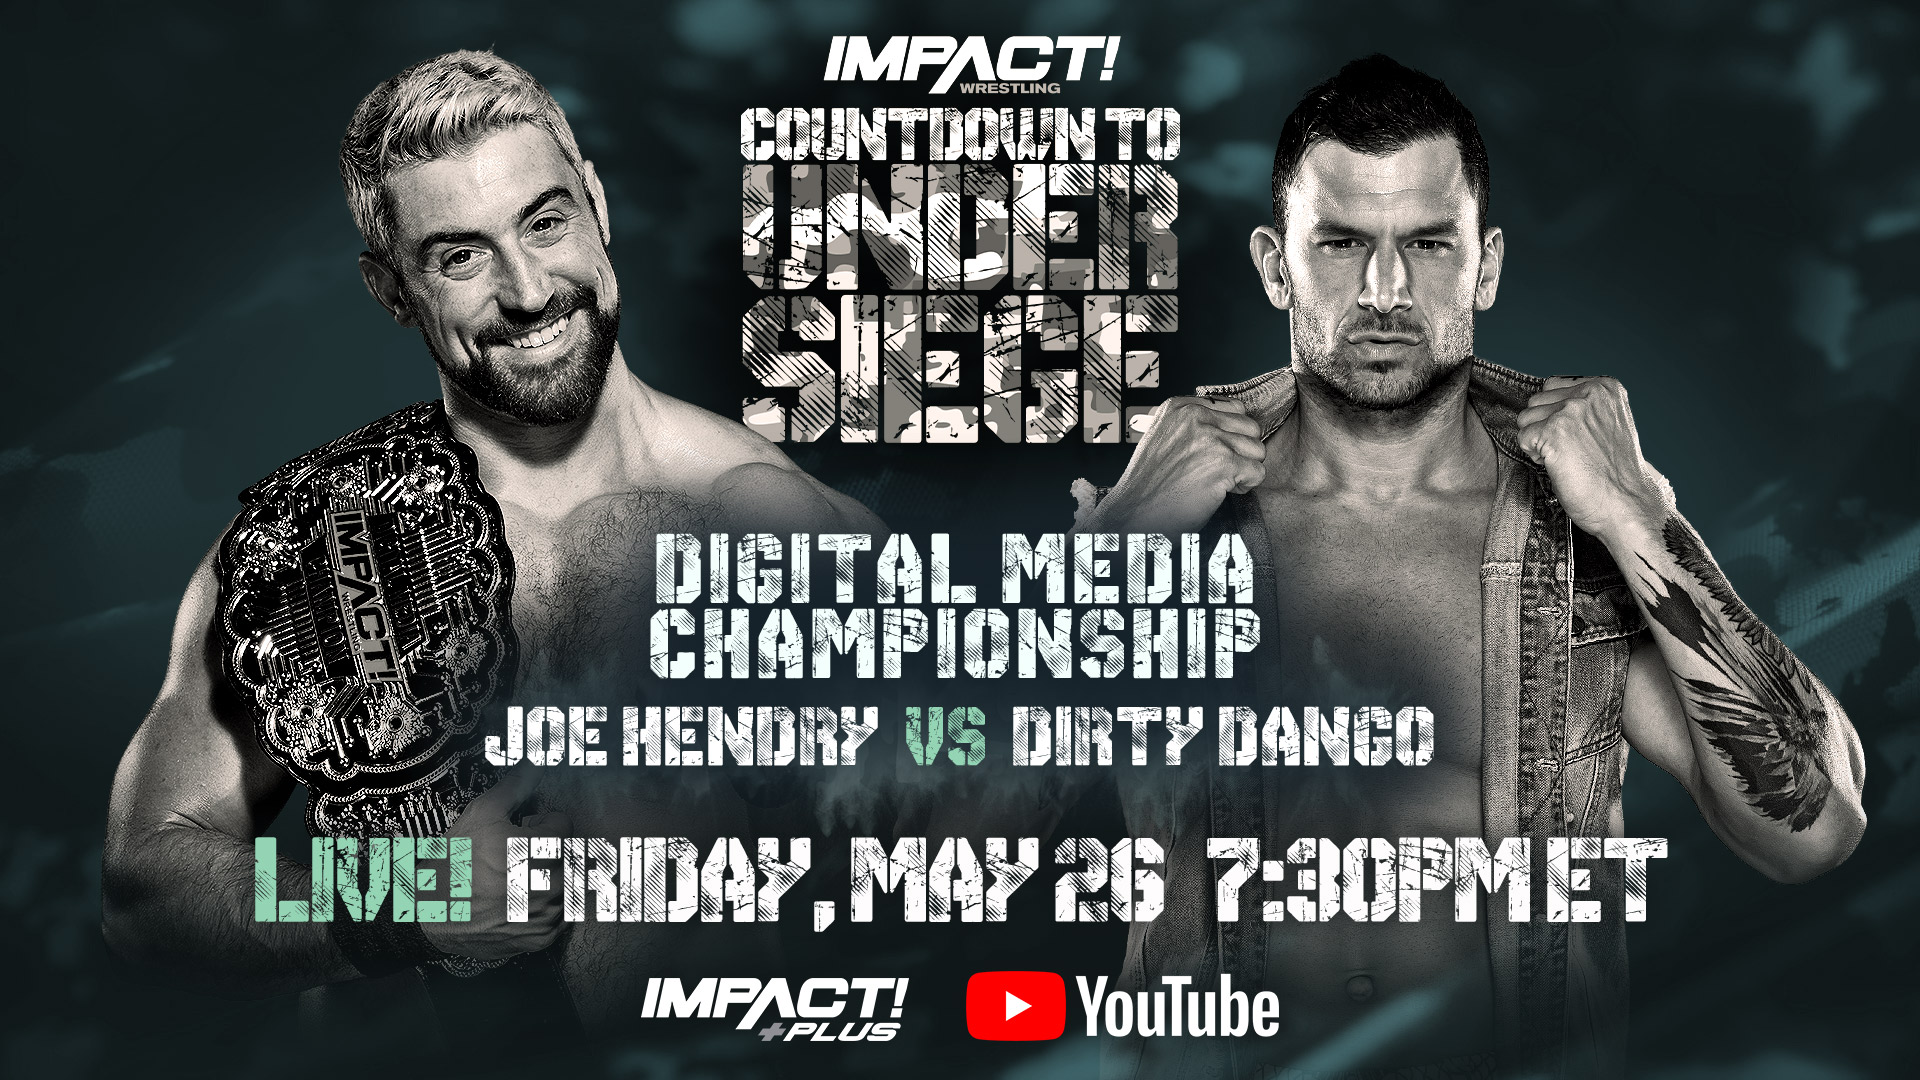 Dango Revealed as Marella’s Attacker, Will Challenge Hendry for Digital Media Title on Countdown to Under Siege – IMPACT Wrestling